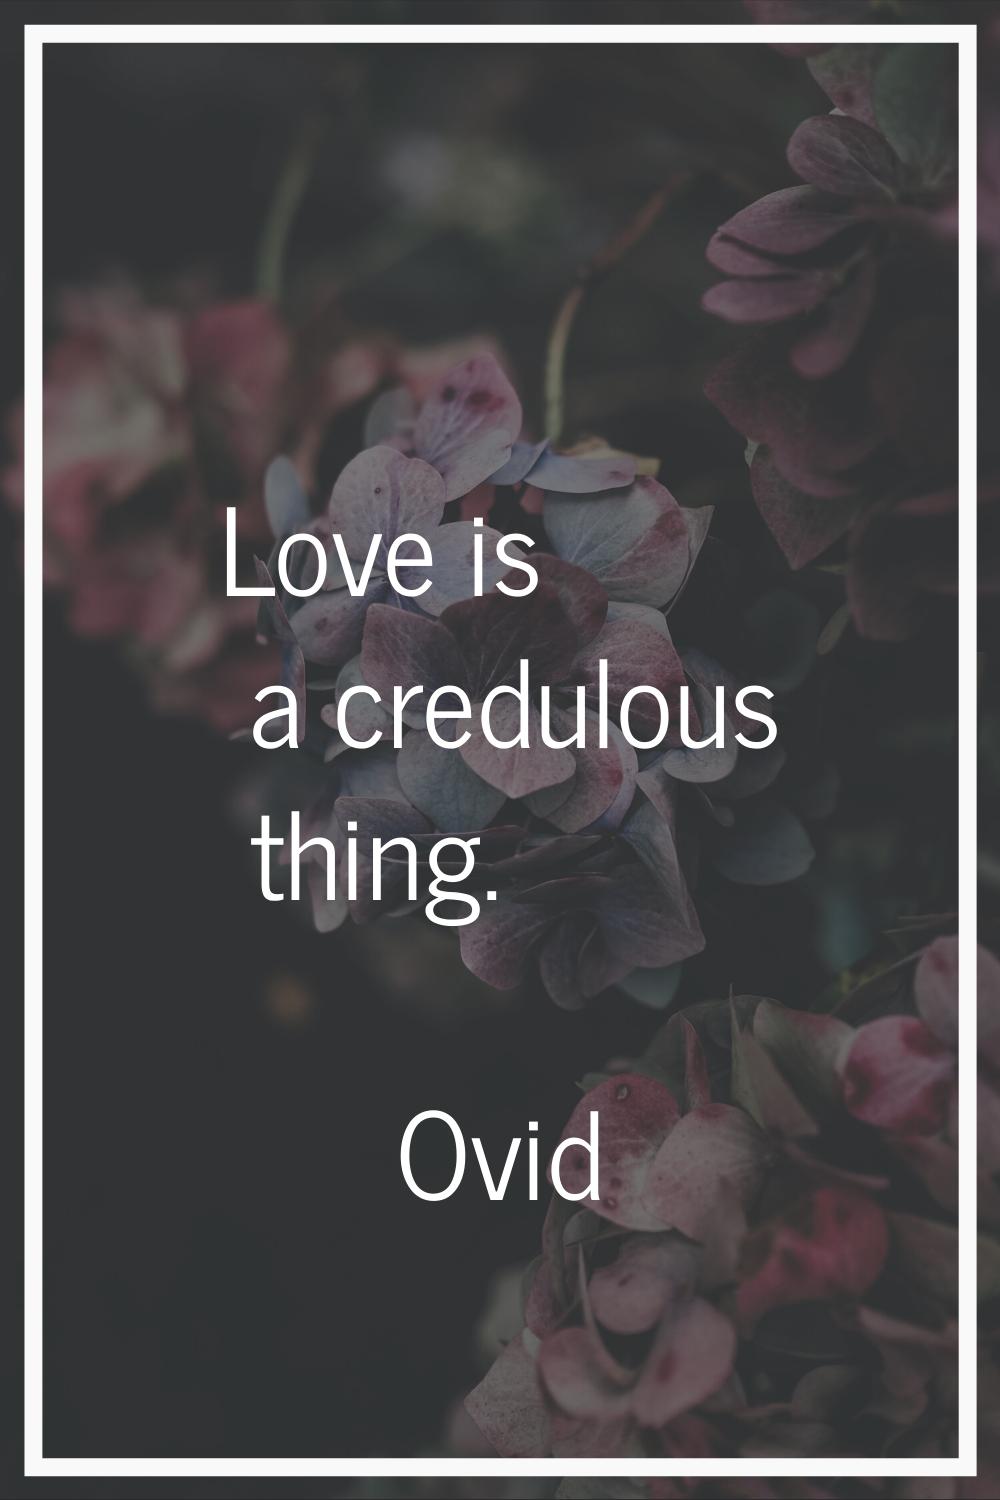 Love is a credulous thing.